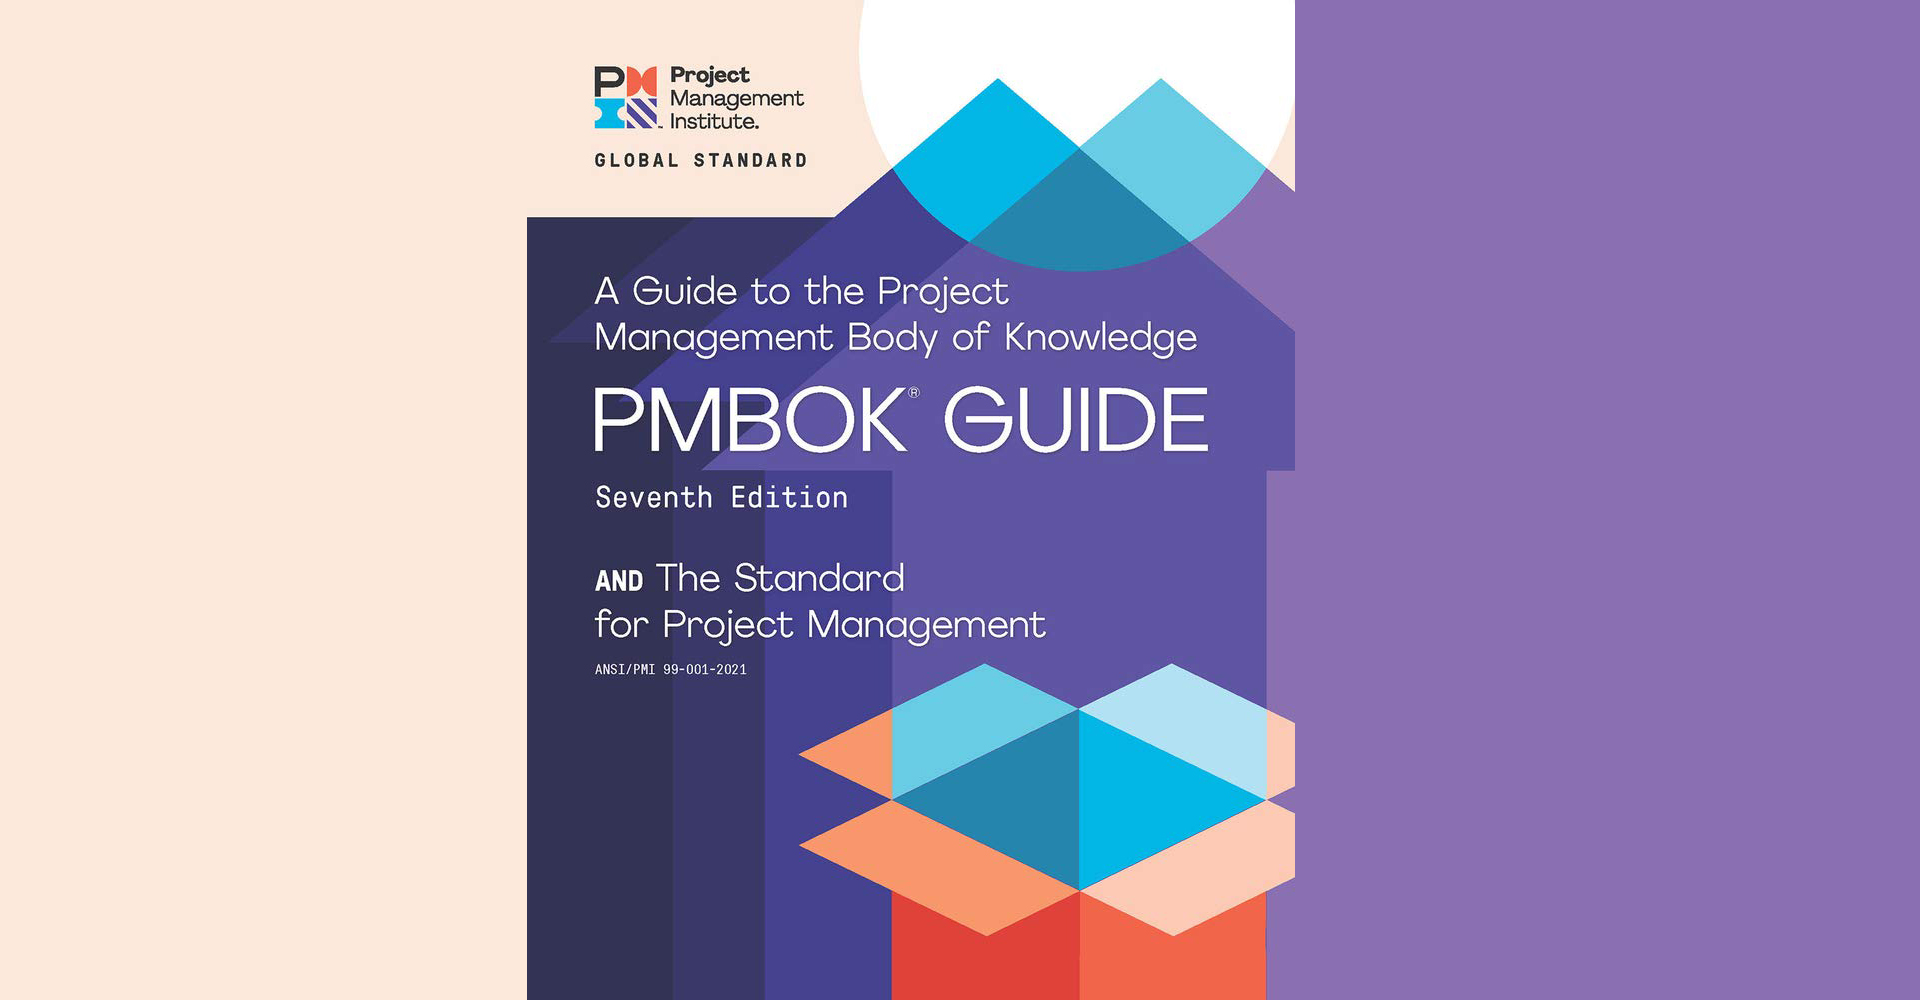 PMBOK® Guide 7 is out. How will the PMP® Exam Change? | Effective ...